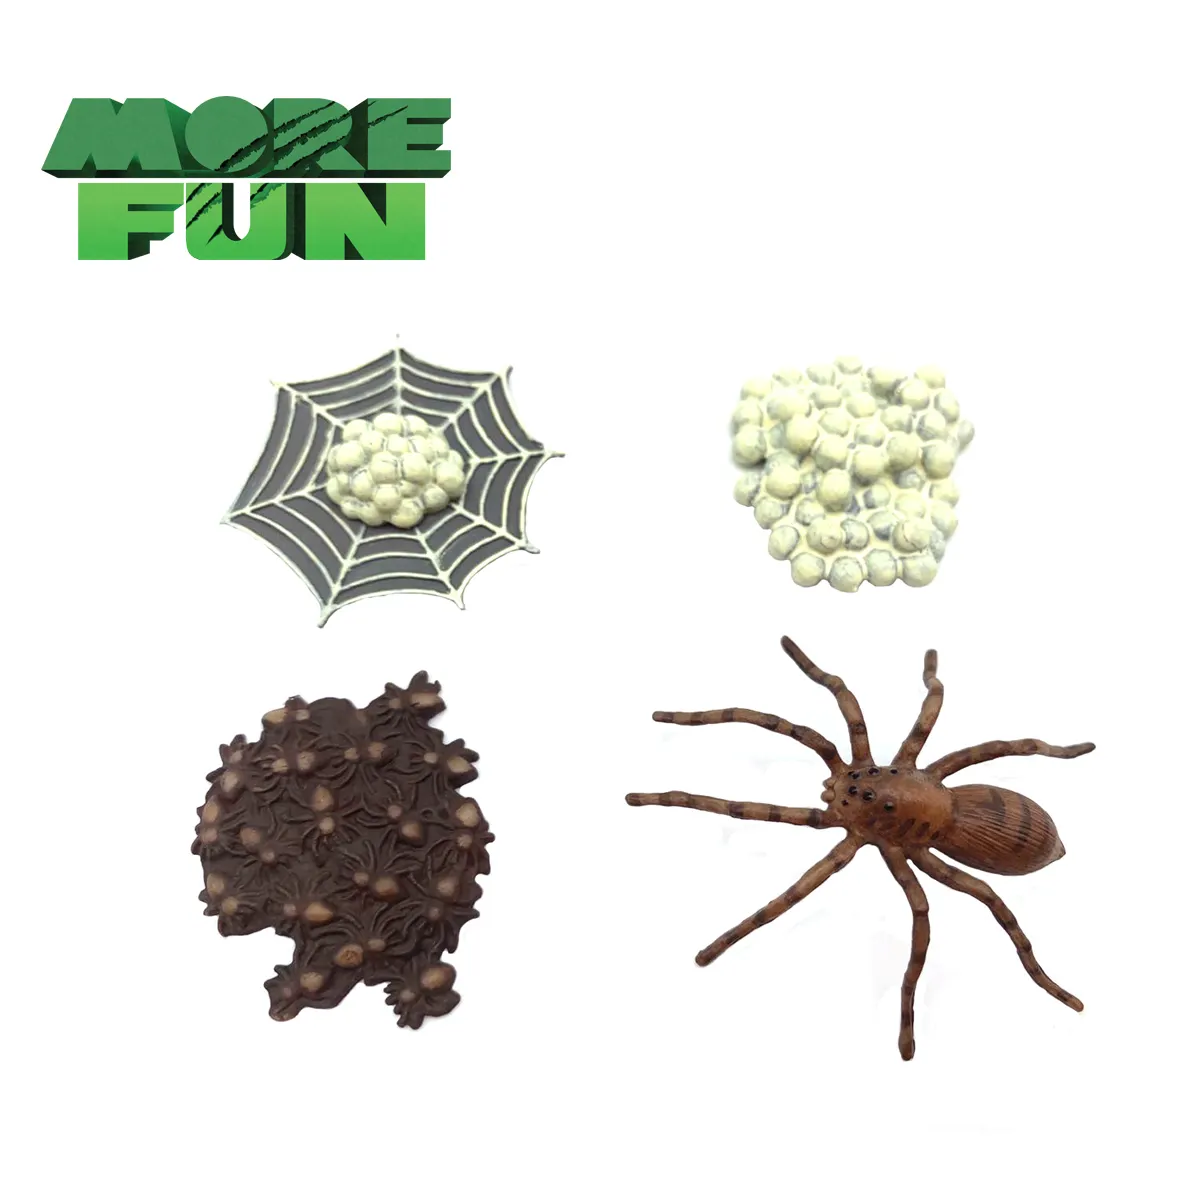 Morefun Solid PVC Simulation Insect Model Plastic Animal Toys Educational Teaching Tools Spider Life Cycle Toys